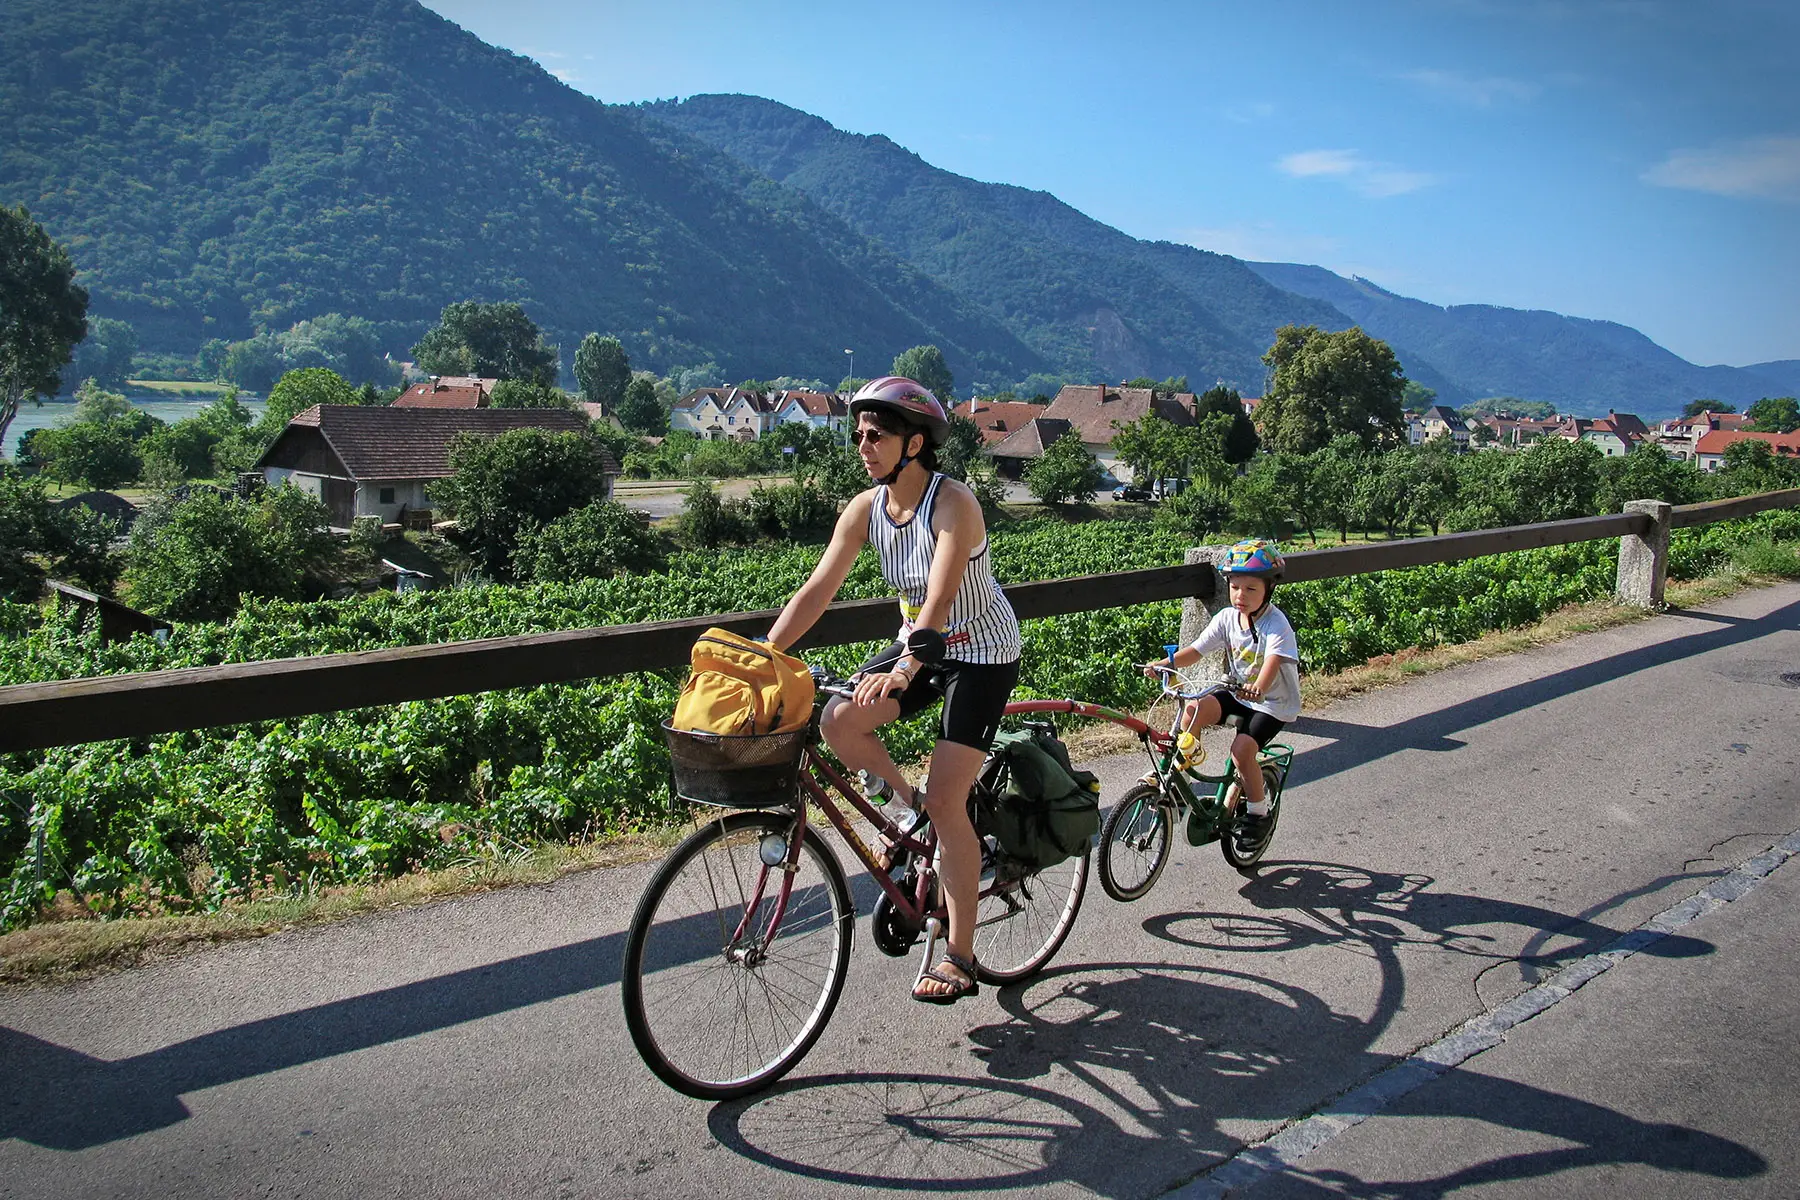 Mother and son cycling in rural Austria